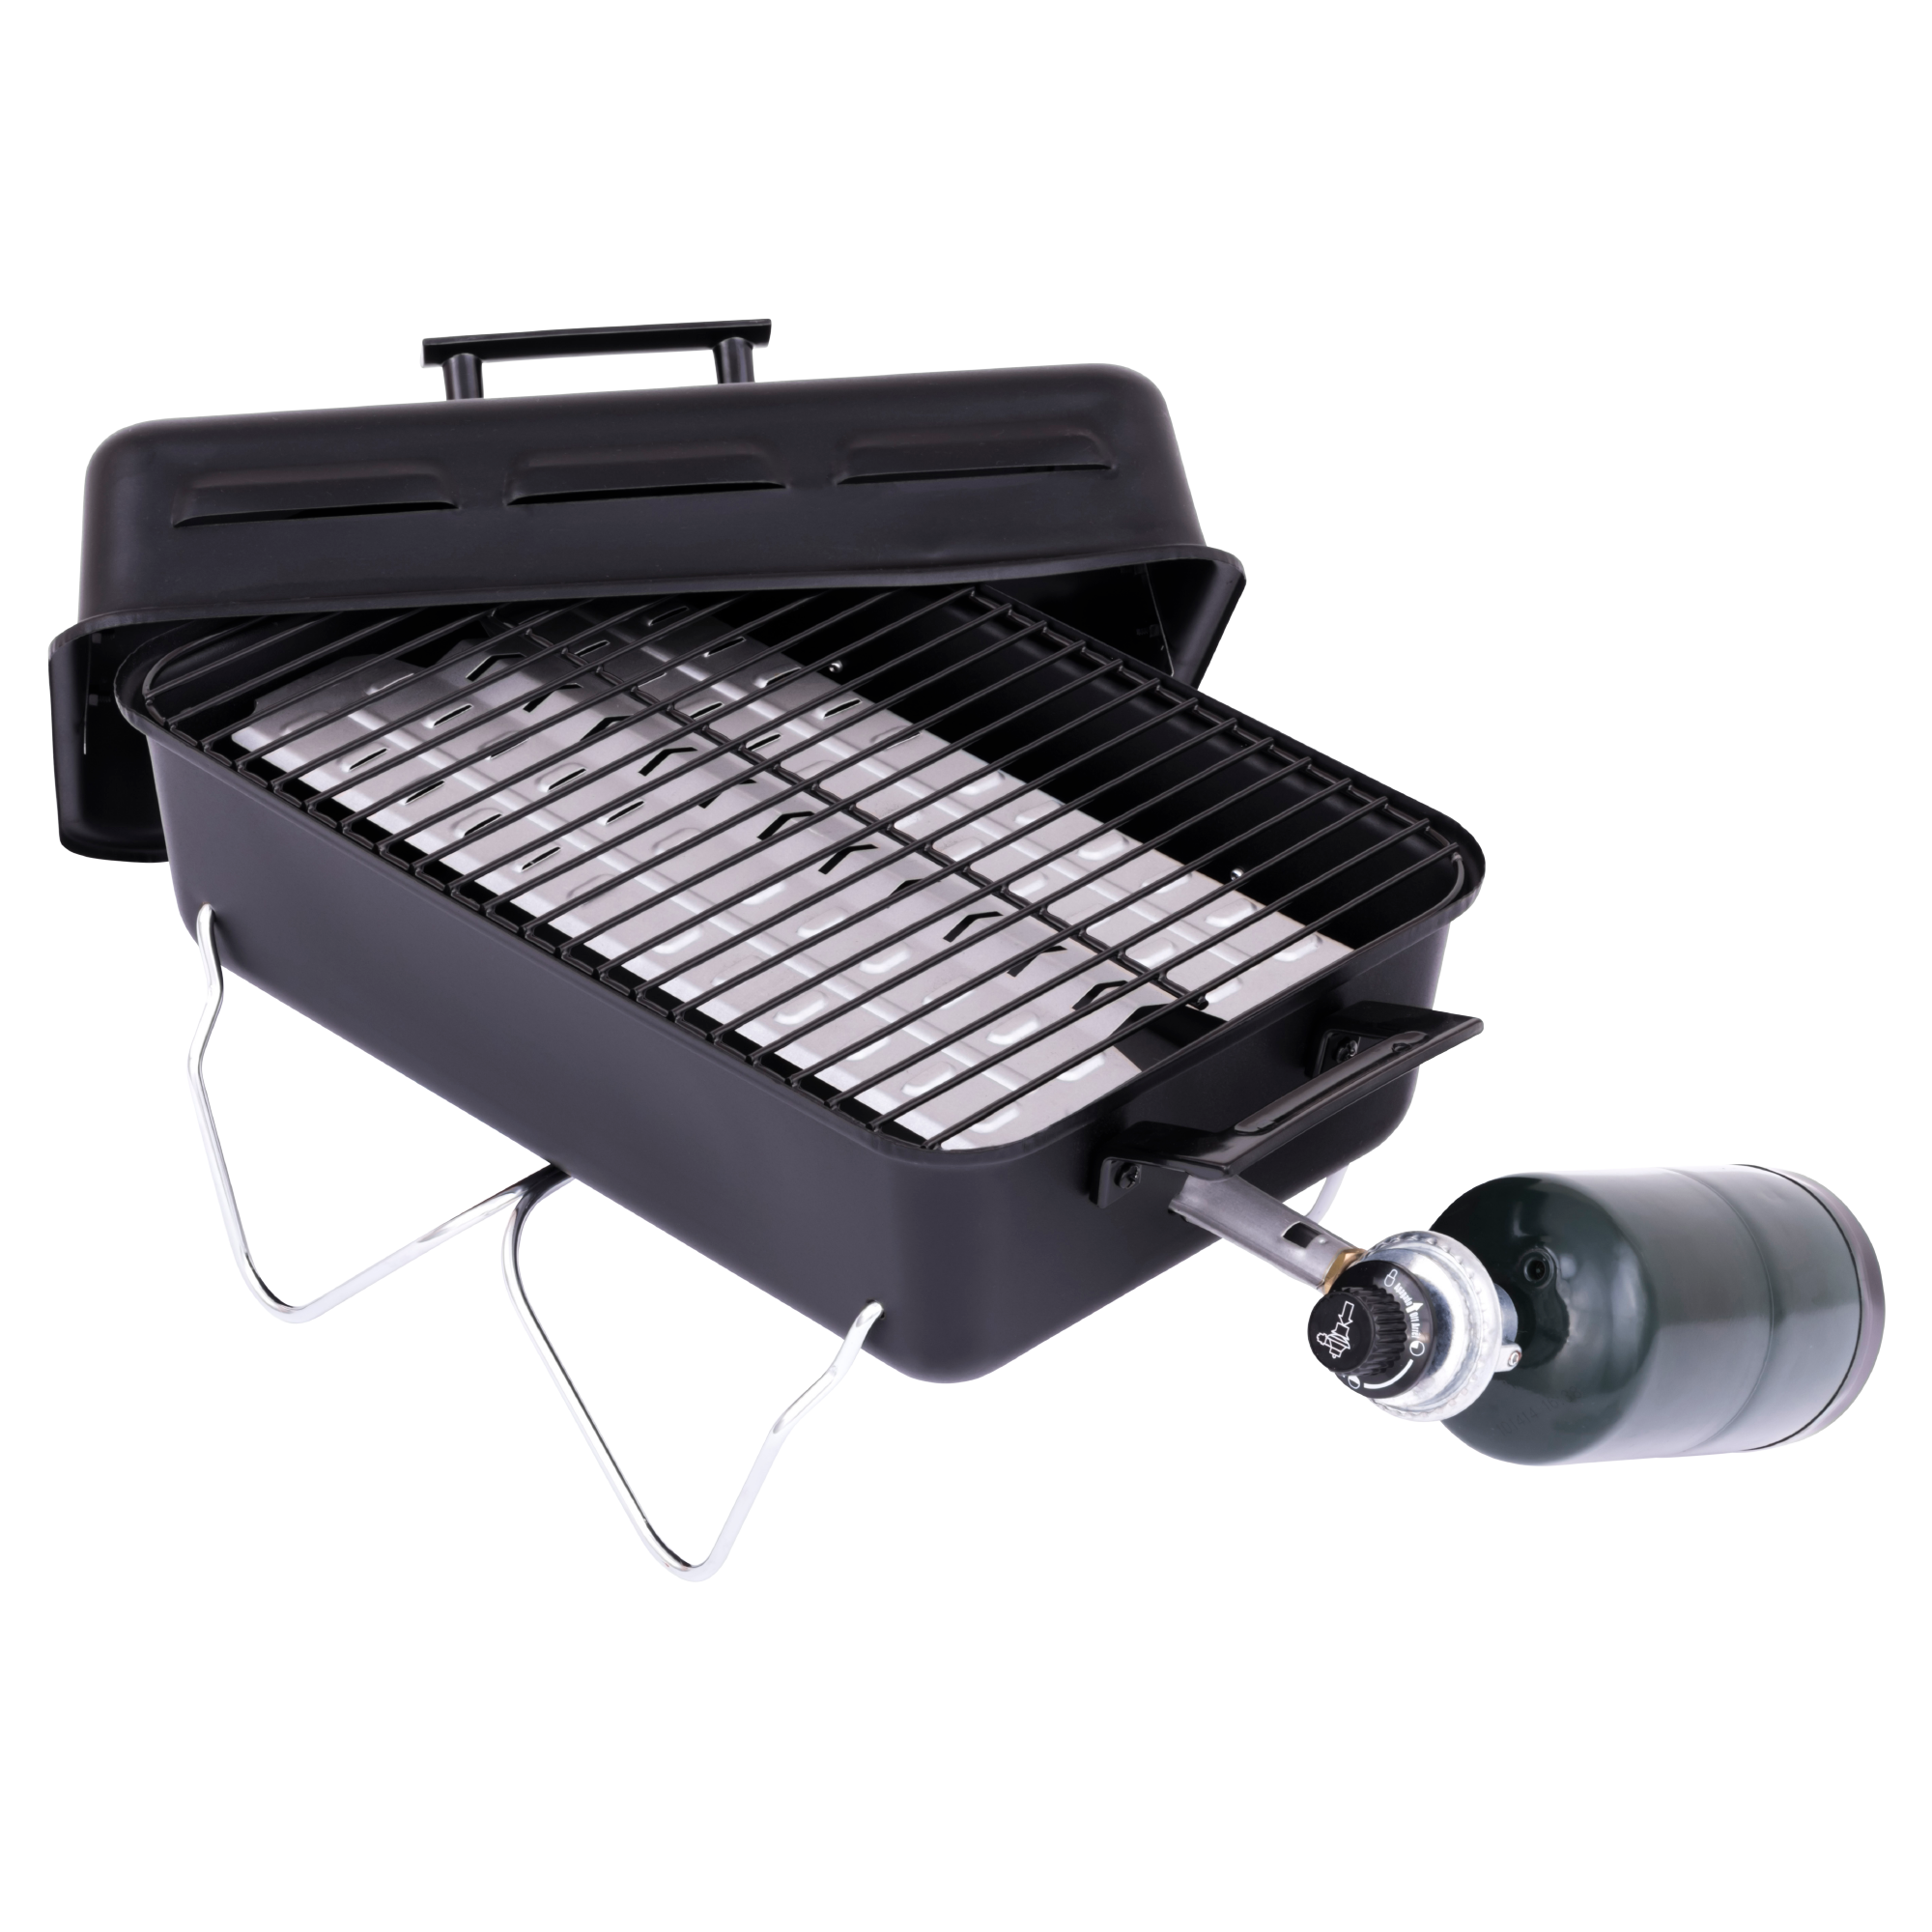 Char-Broil Portable Gas Grill - image 4 of 12